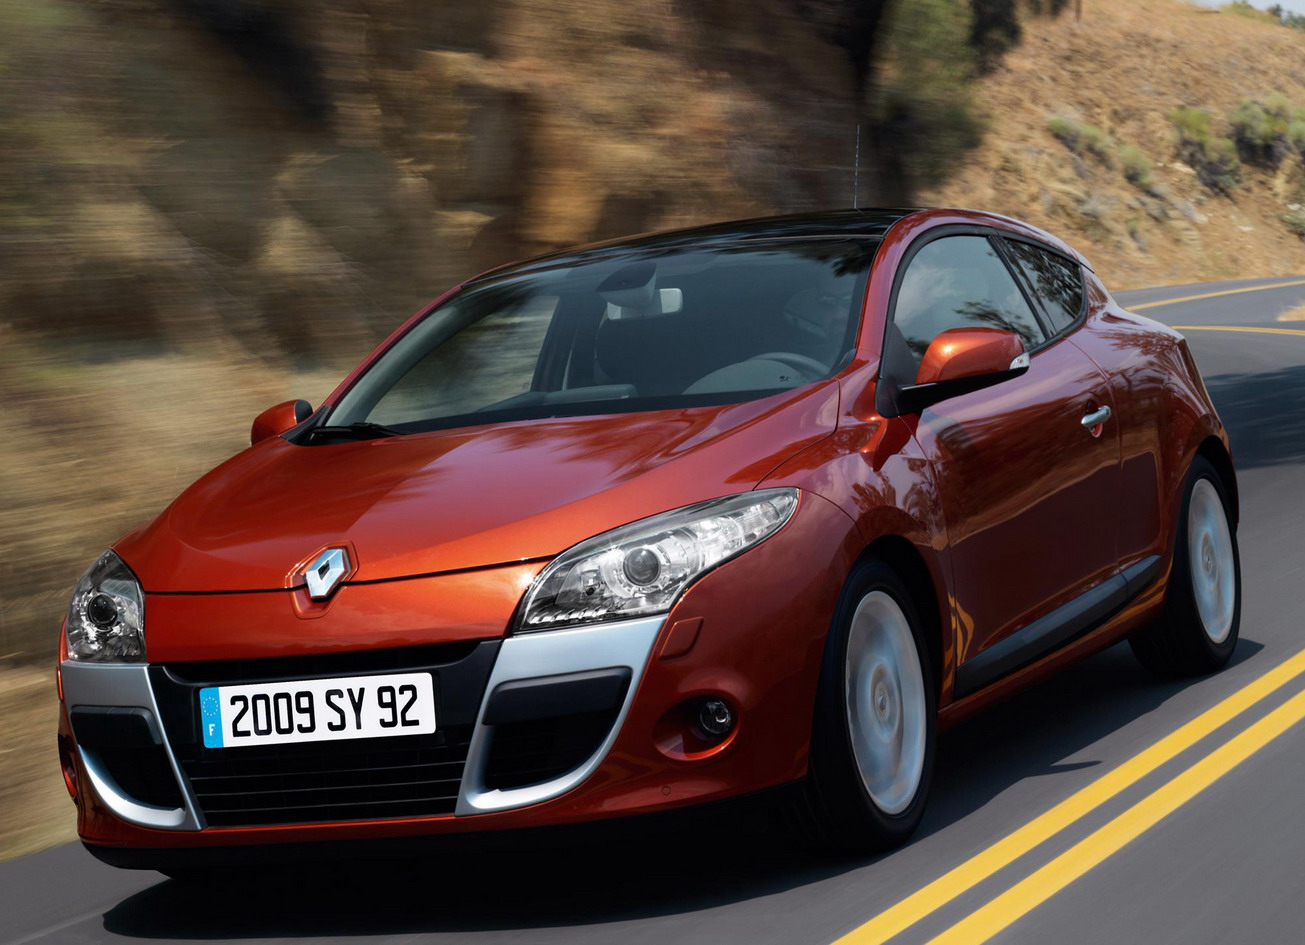 New Renault Megane Coupe: Official Photos and Details | Automobile Box